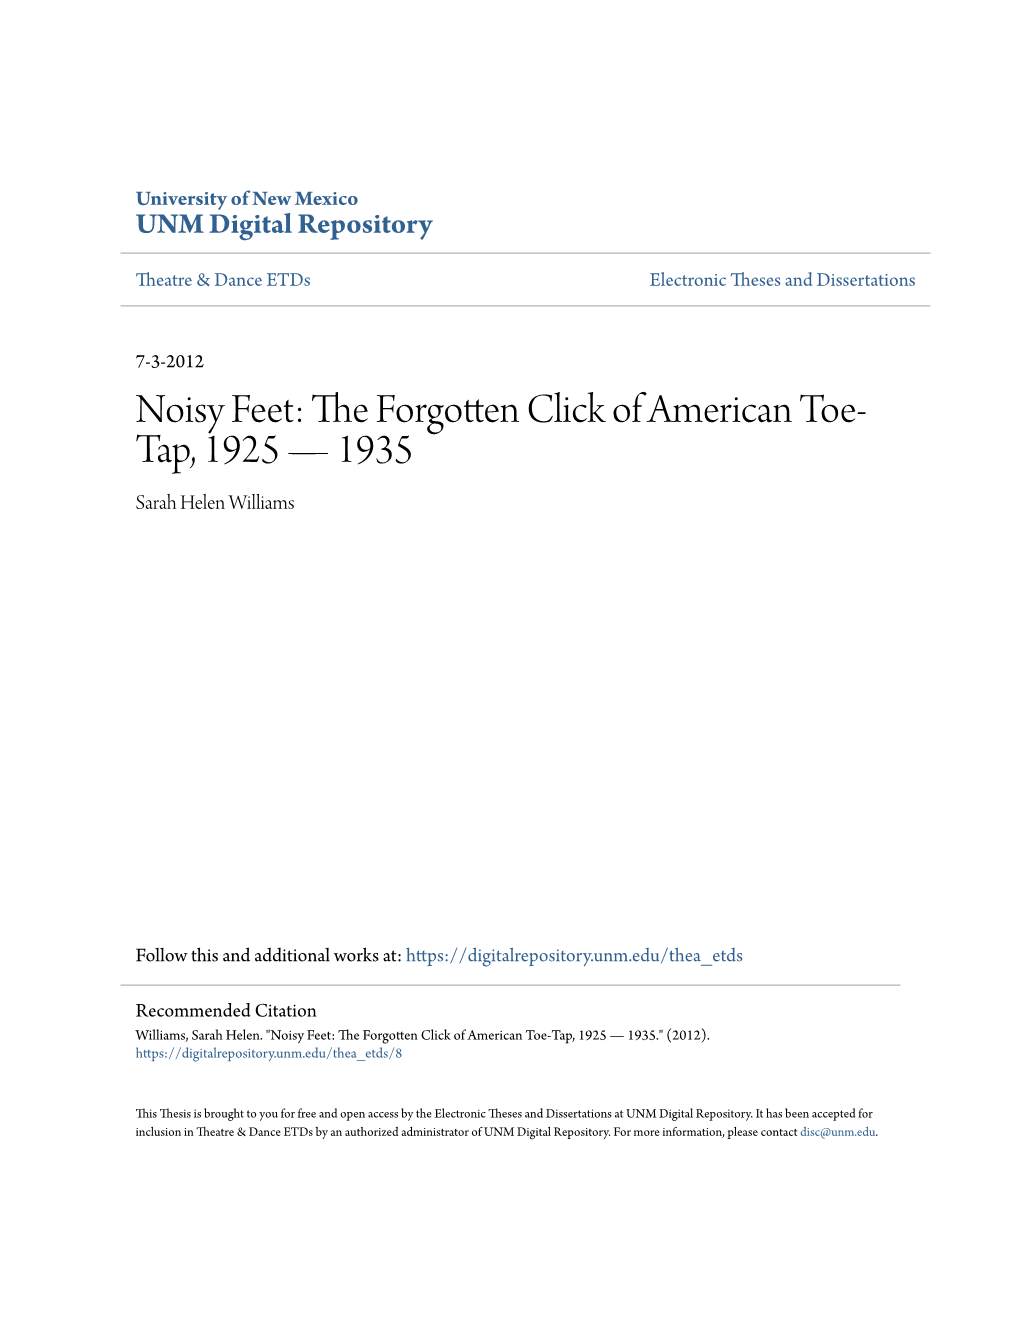 The Forgotten Click of American Toe-Tap, 1925 – 1935